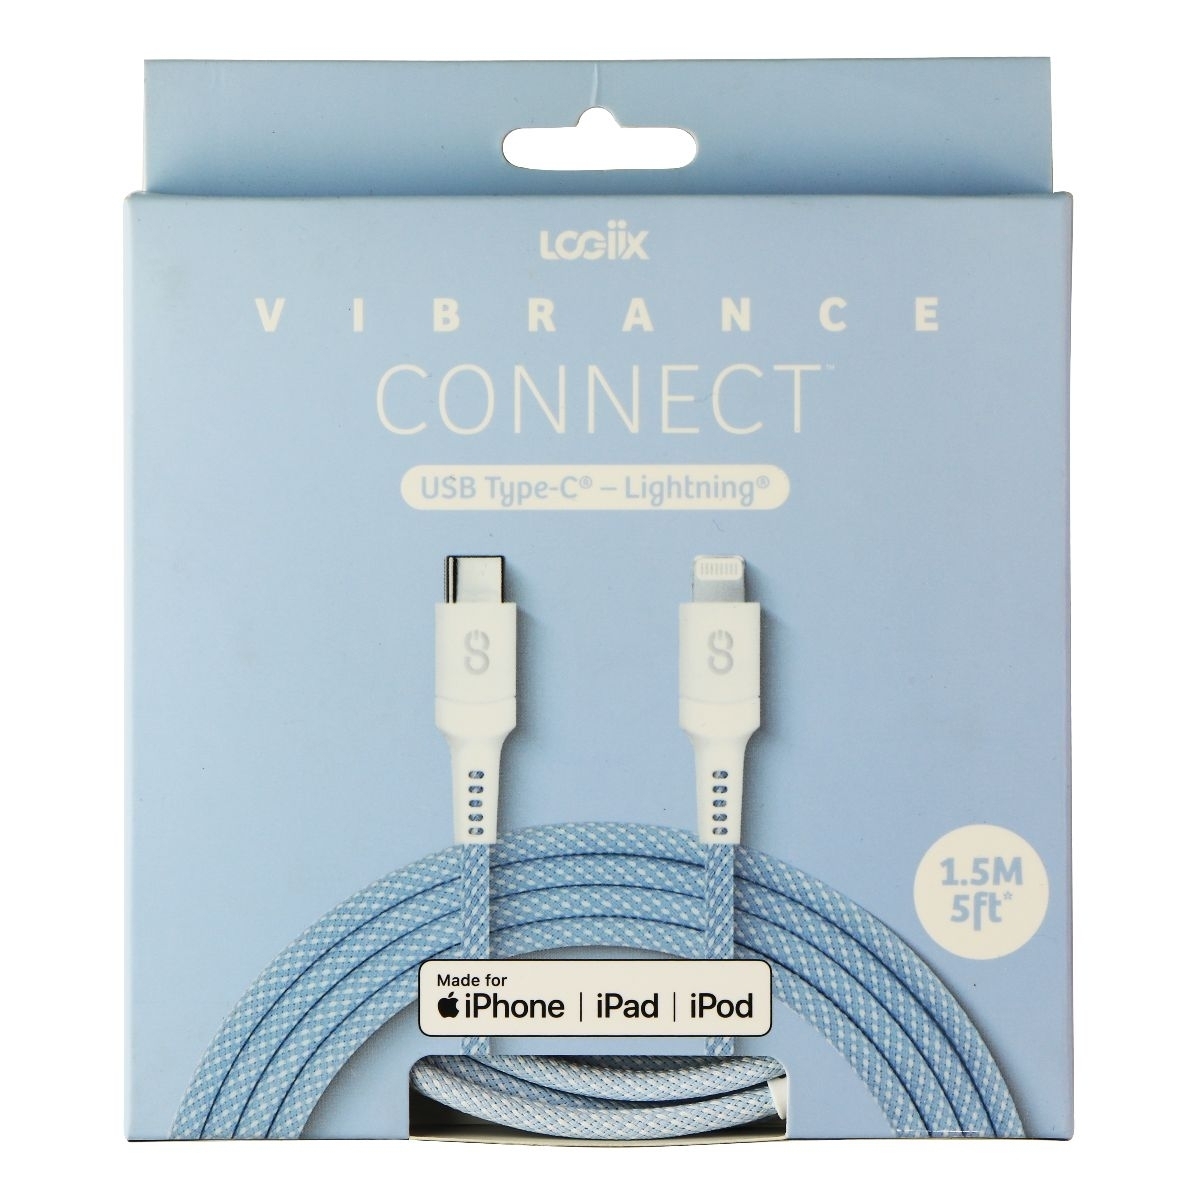 Logiix Vibrance Connect (5-ft) USB-C Type C To Lightning 8-Pin Cable - Blue (Refurbished)